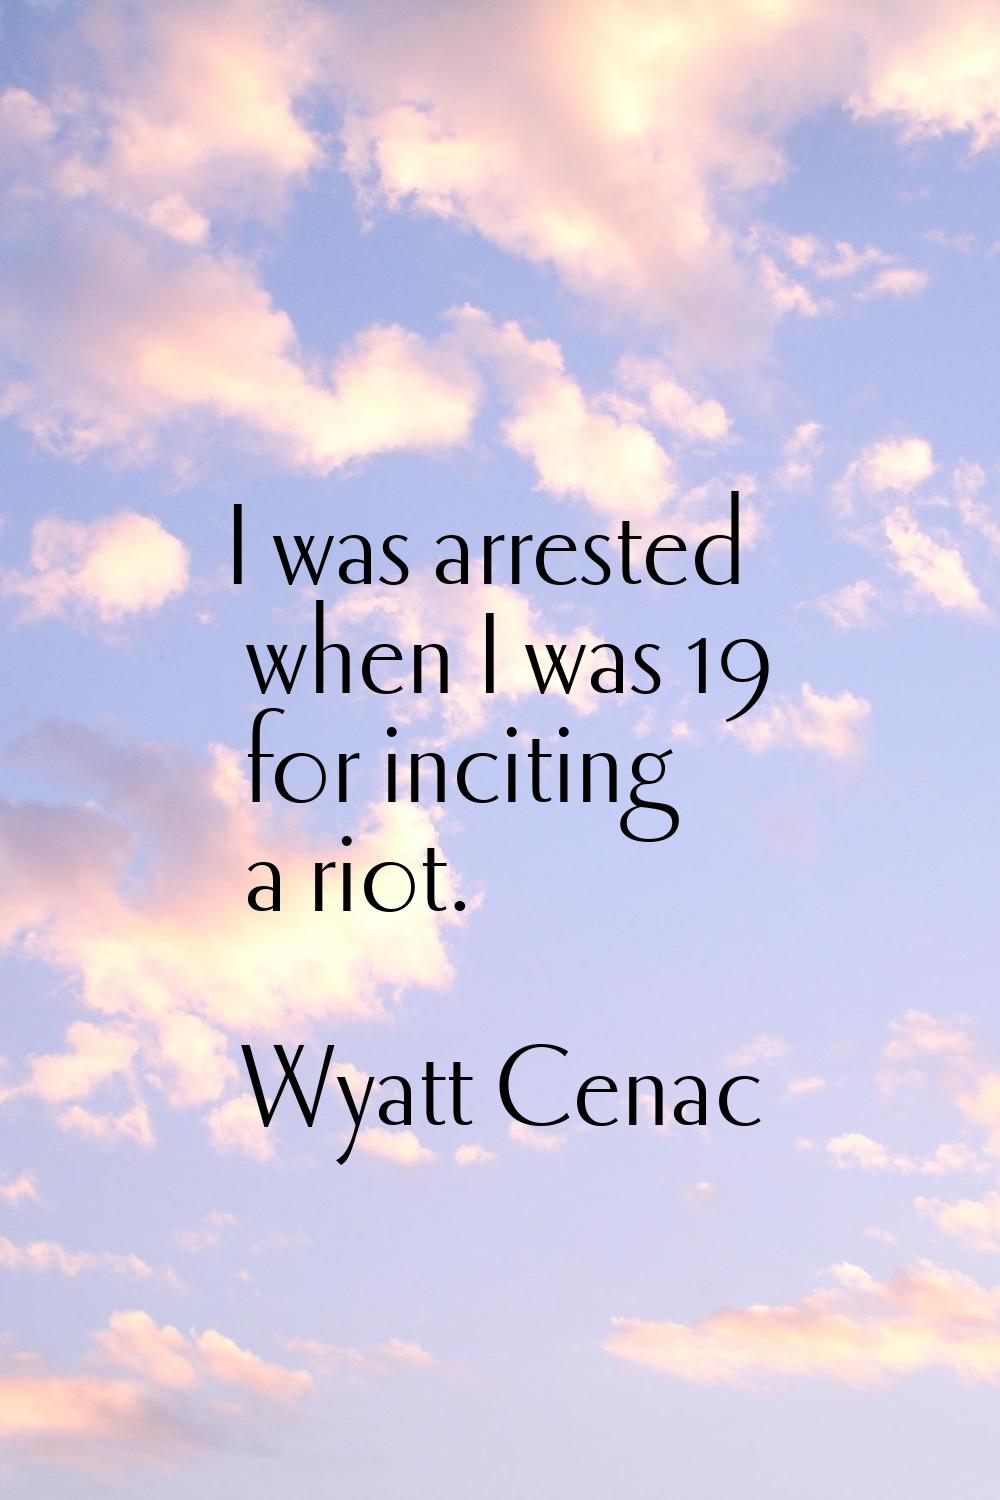 I was arrested when I was 19 for inciting a riot.